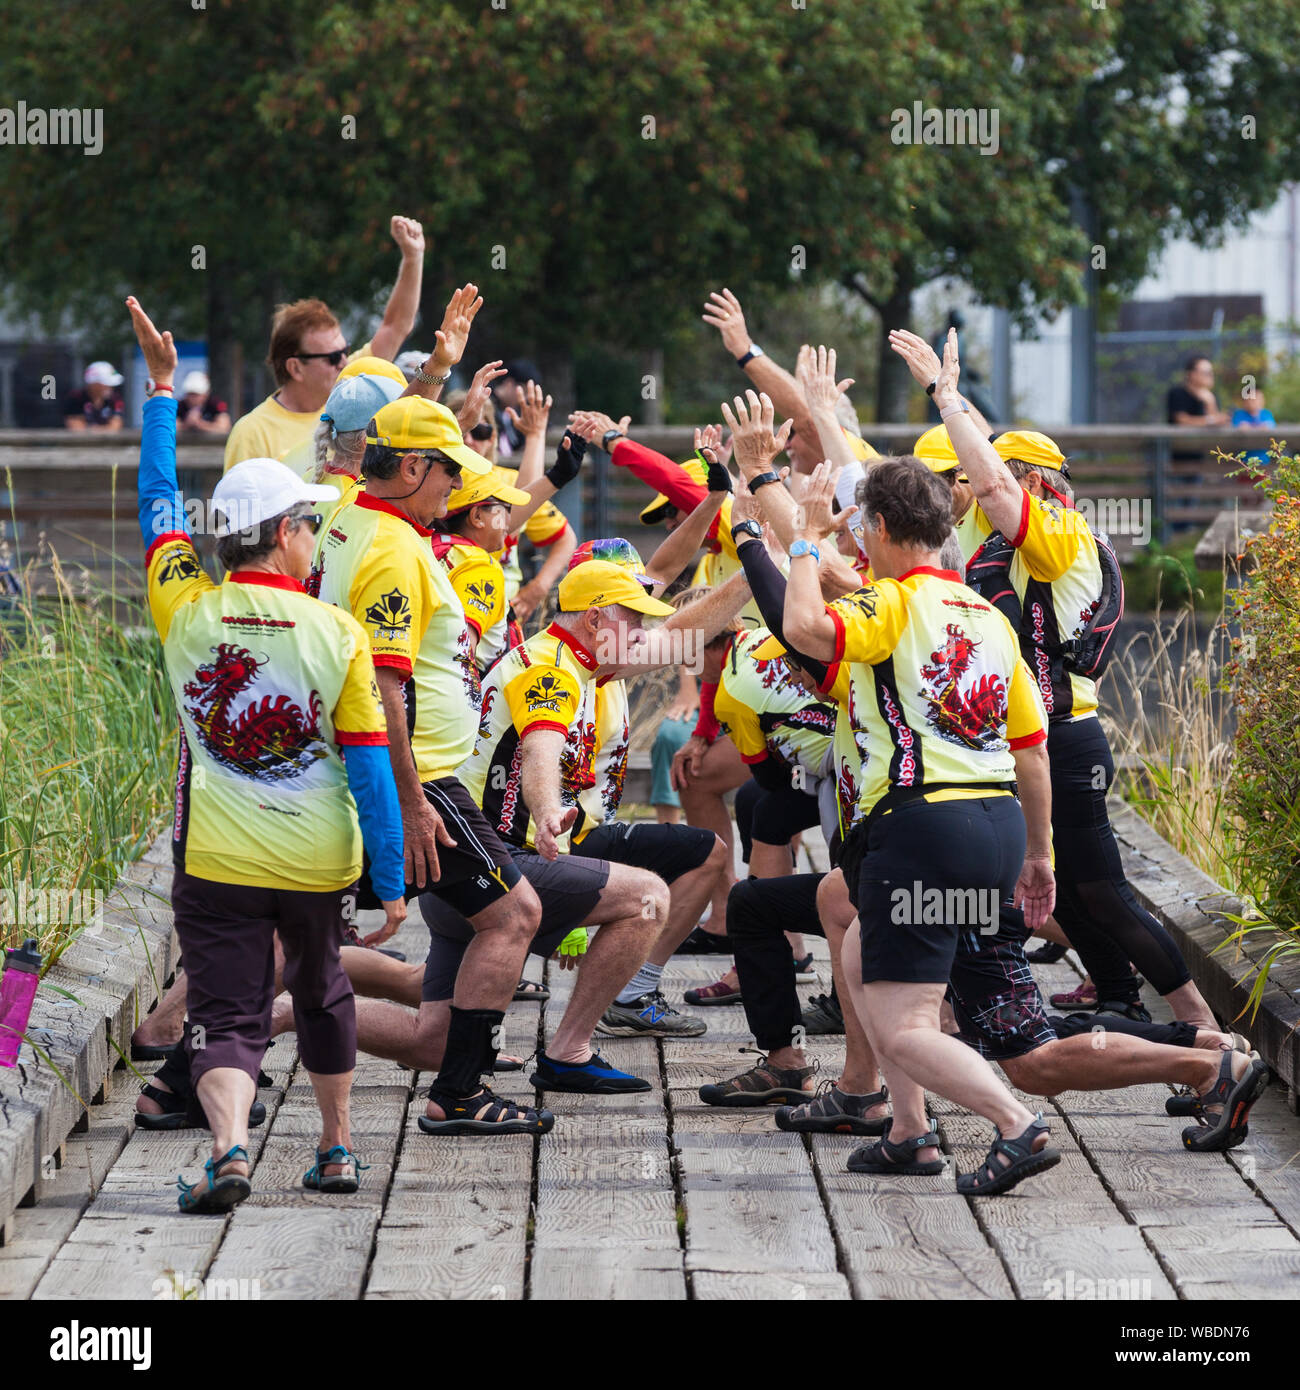 Members of a mixed senior team warming up at the 2019 Steveston Dragon Boat Festival in British Columbia Canada Stock Photo